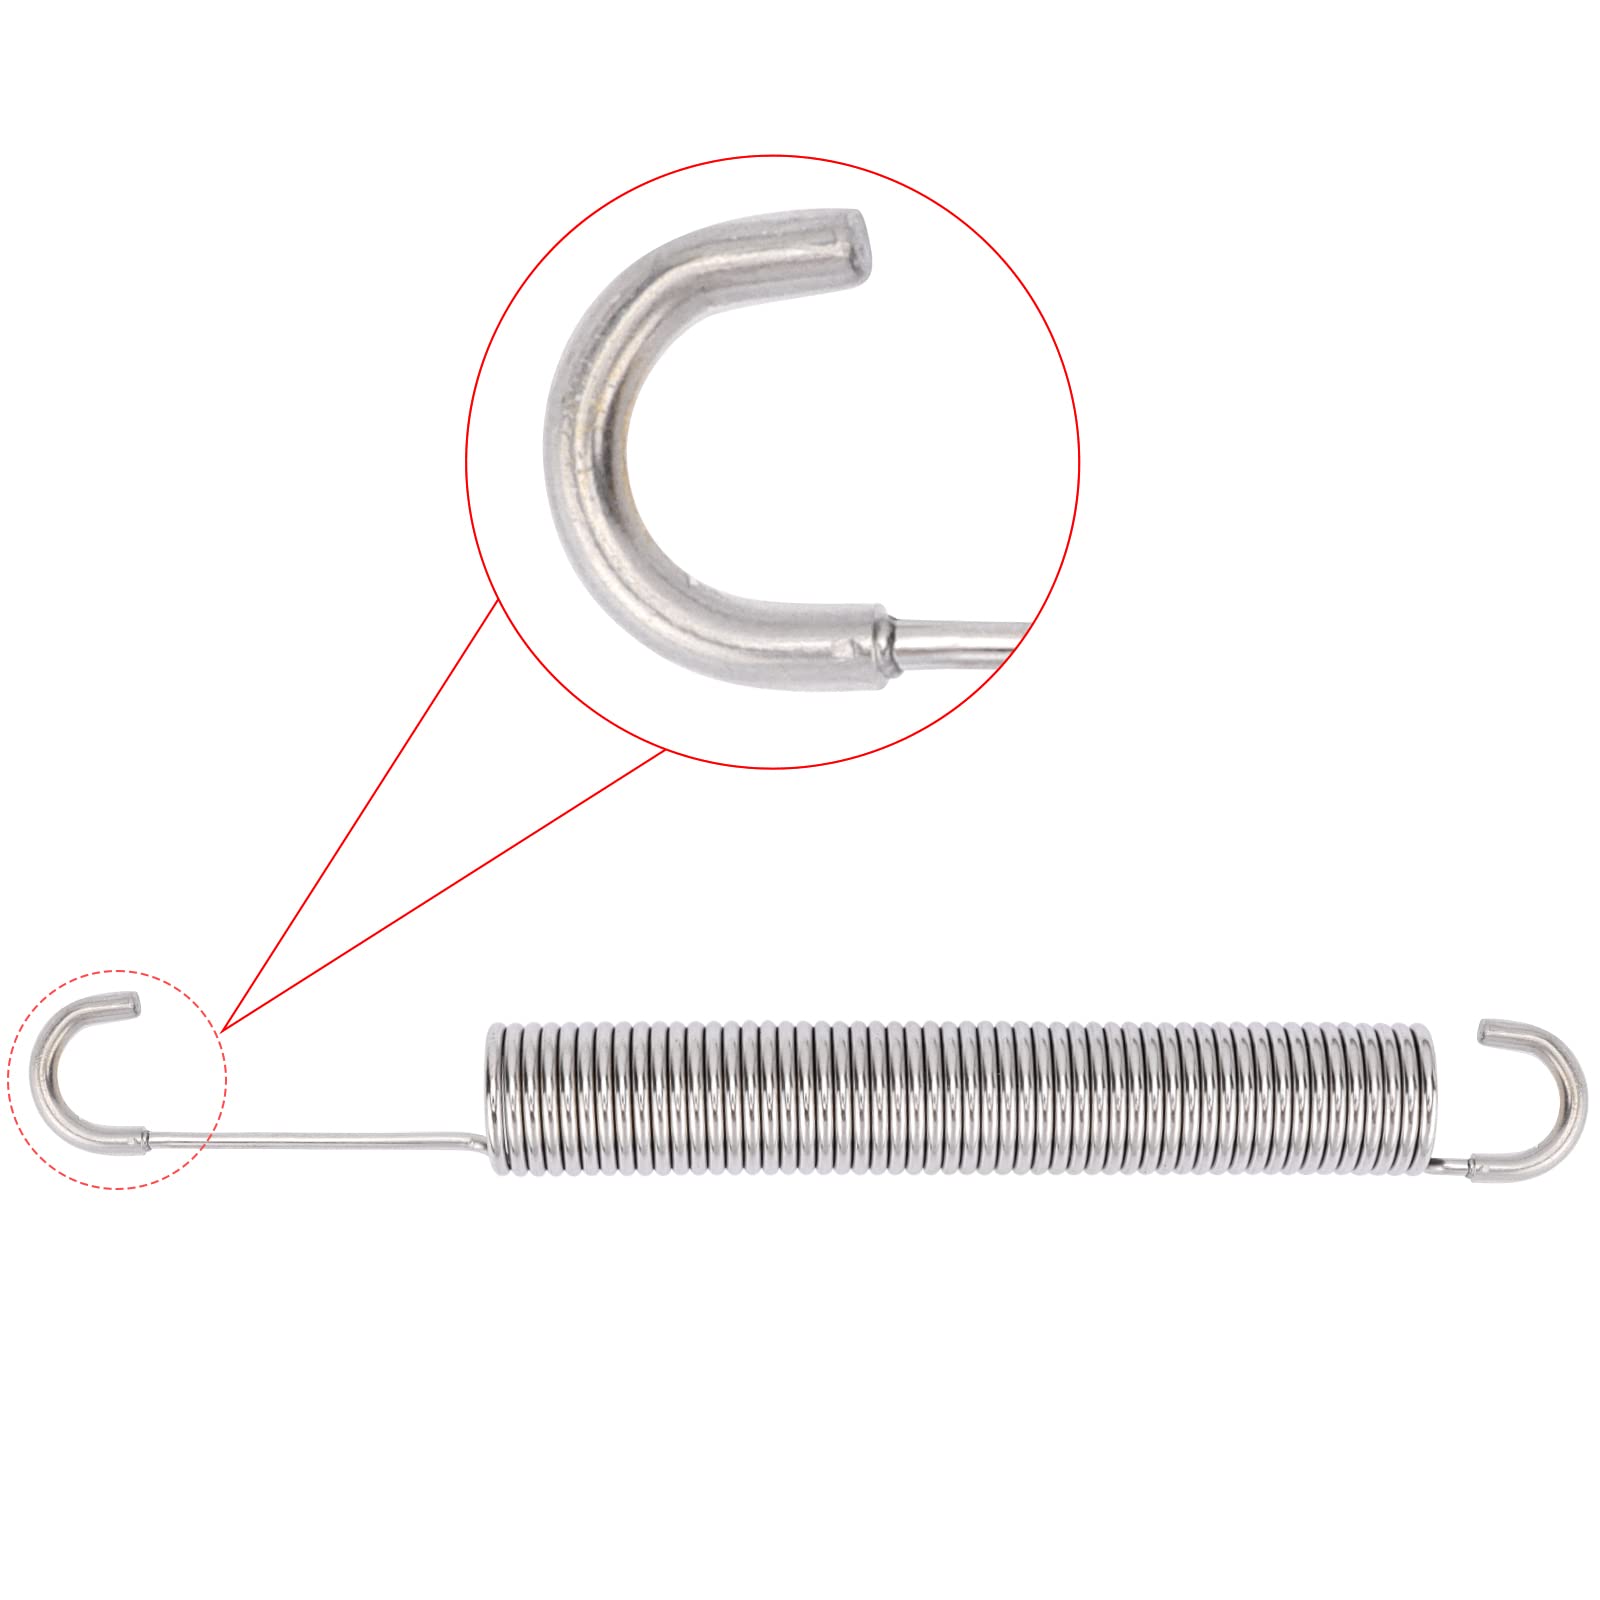 GNPADR 7 inch Stainless Steel Replacement Recliner Sofa Chair Mechanism Tension Spring - Long Neck Hook Style